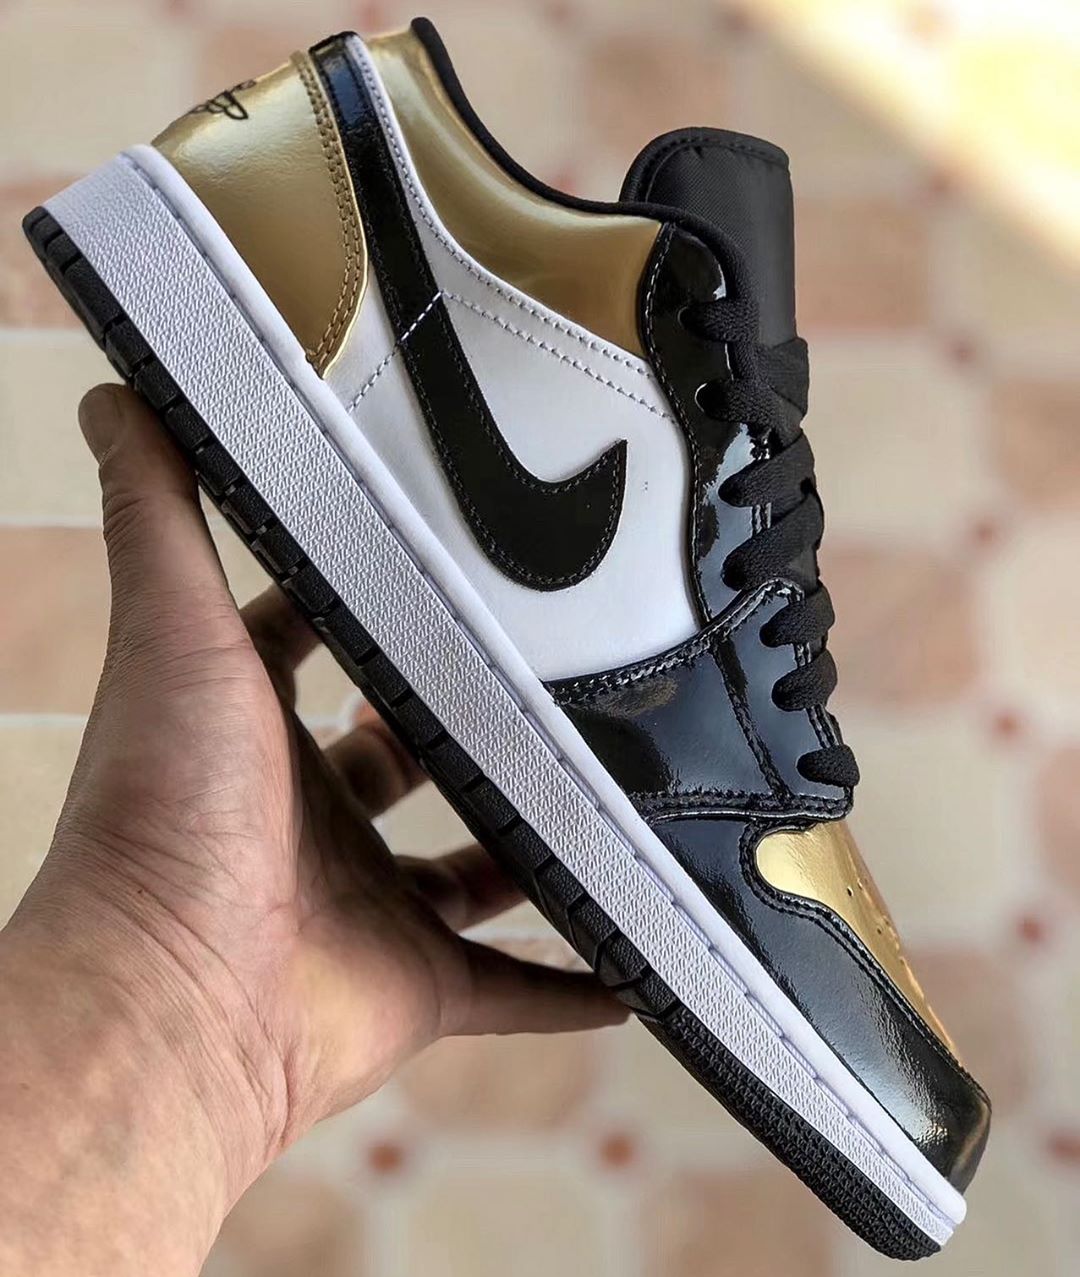 gold toe 1s low